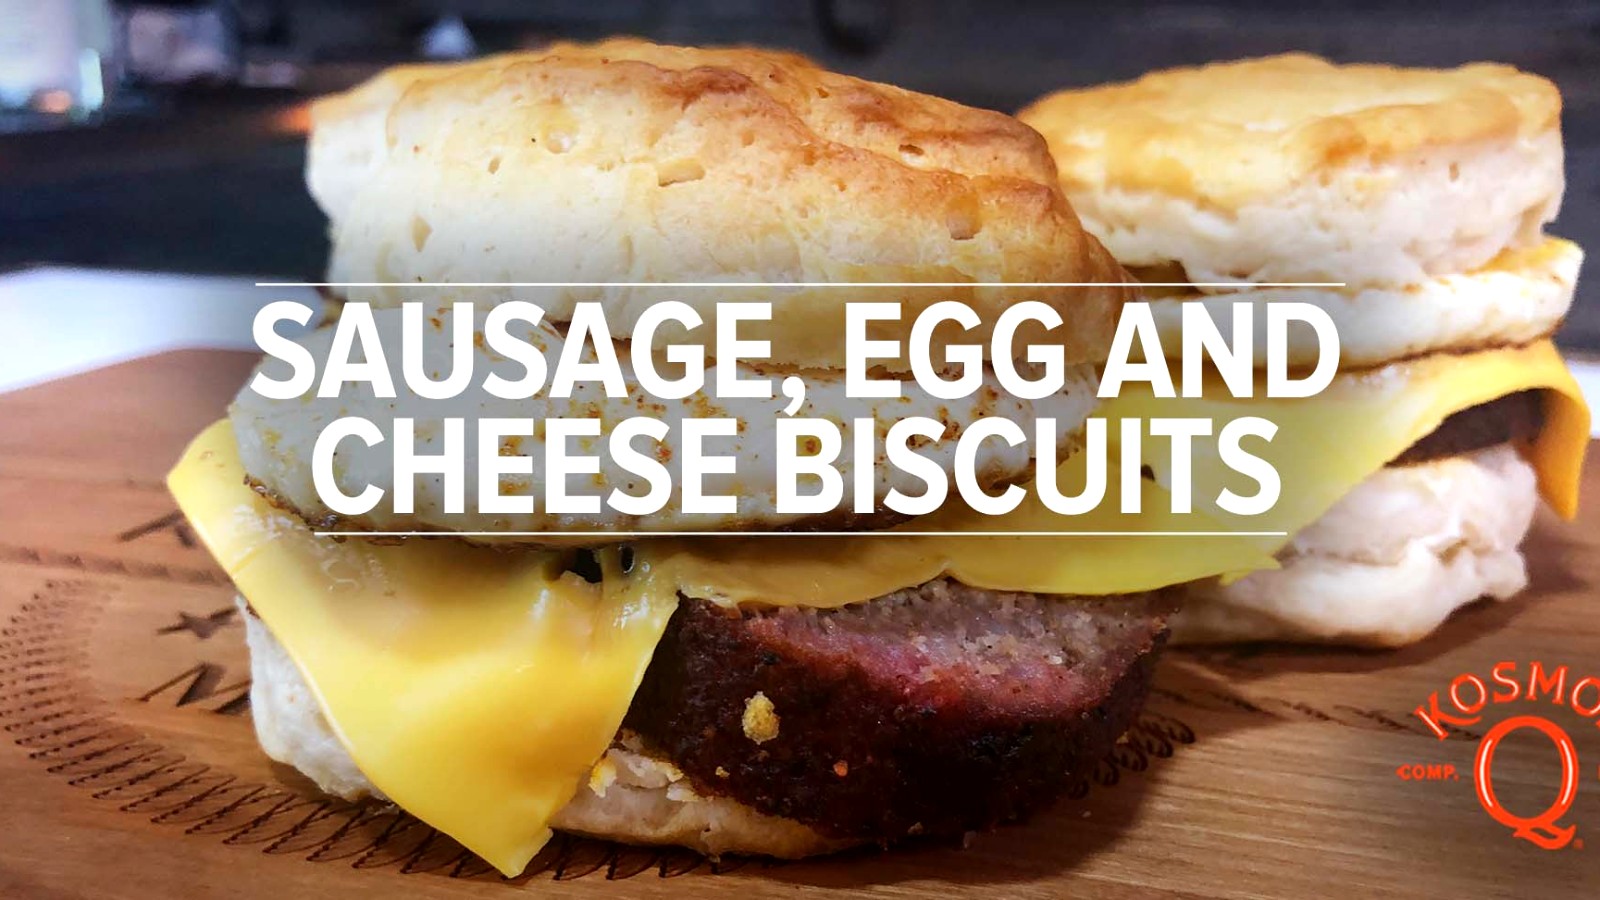 Image of Sausage Egg and Cheese Biscuits | $5 Breakfast Recipe